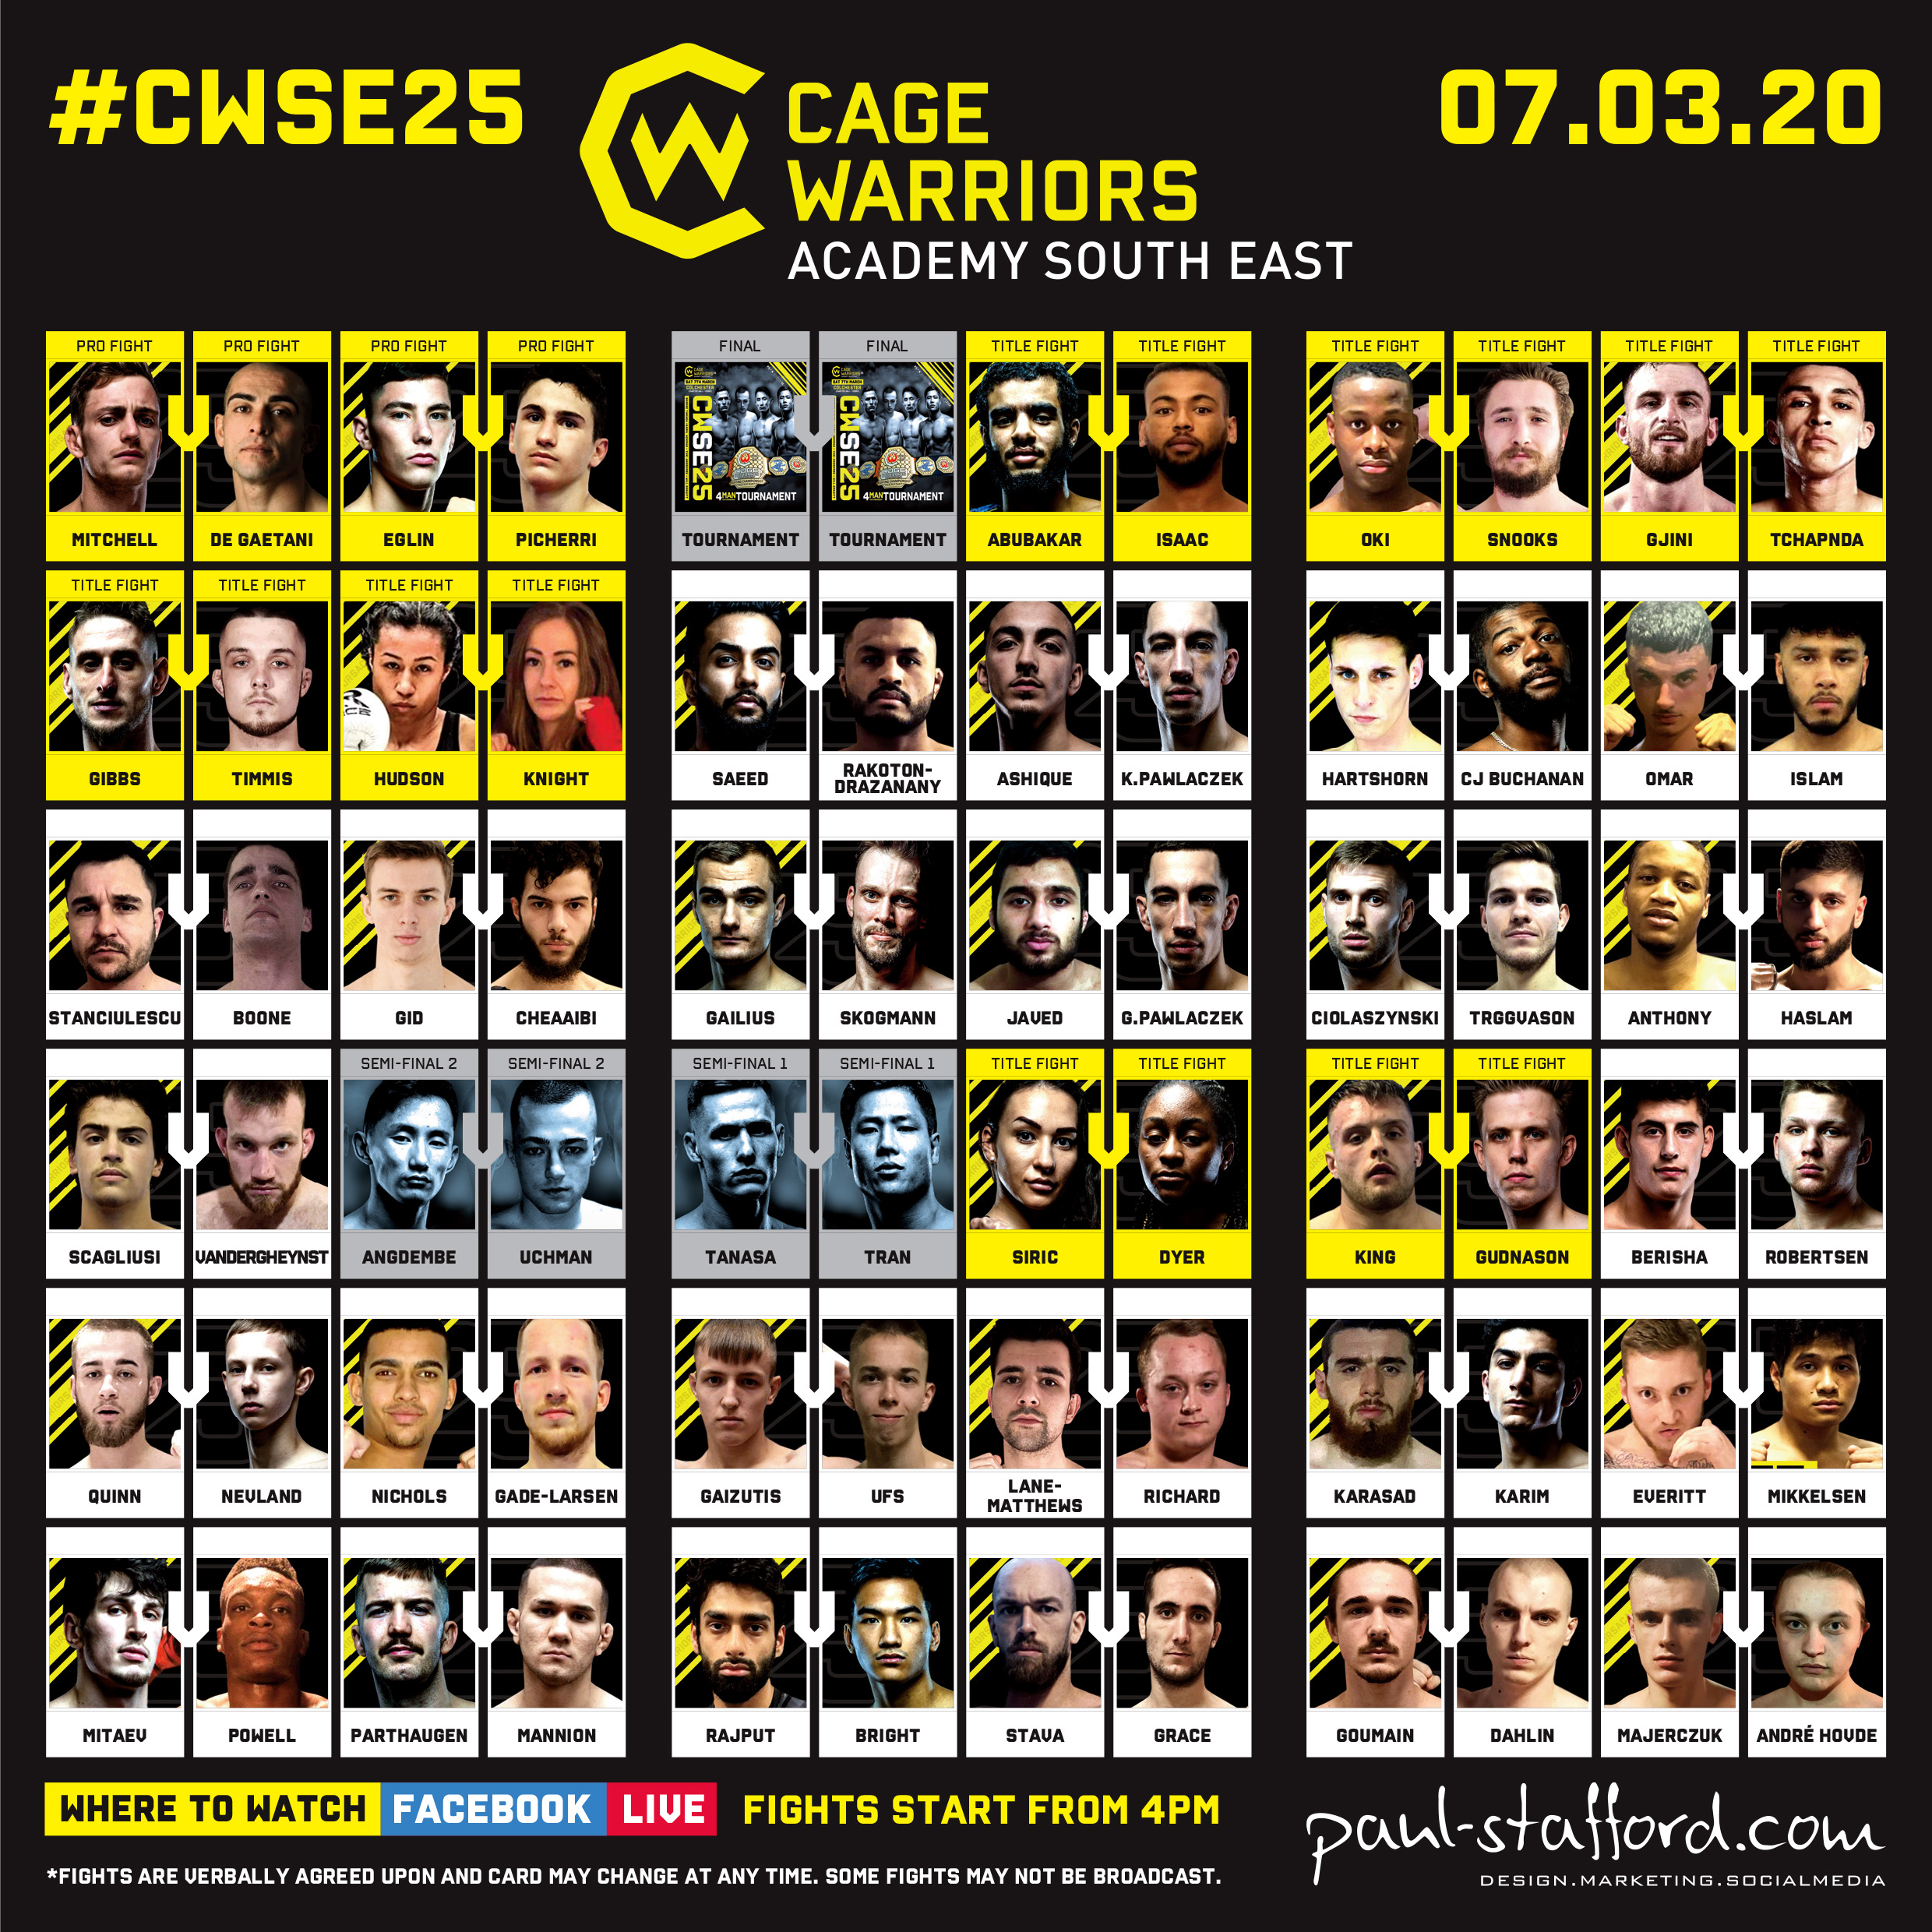 Cage Warriors Academy South East 25